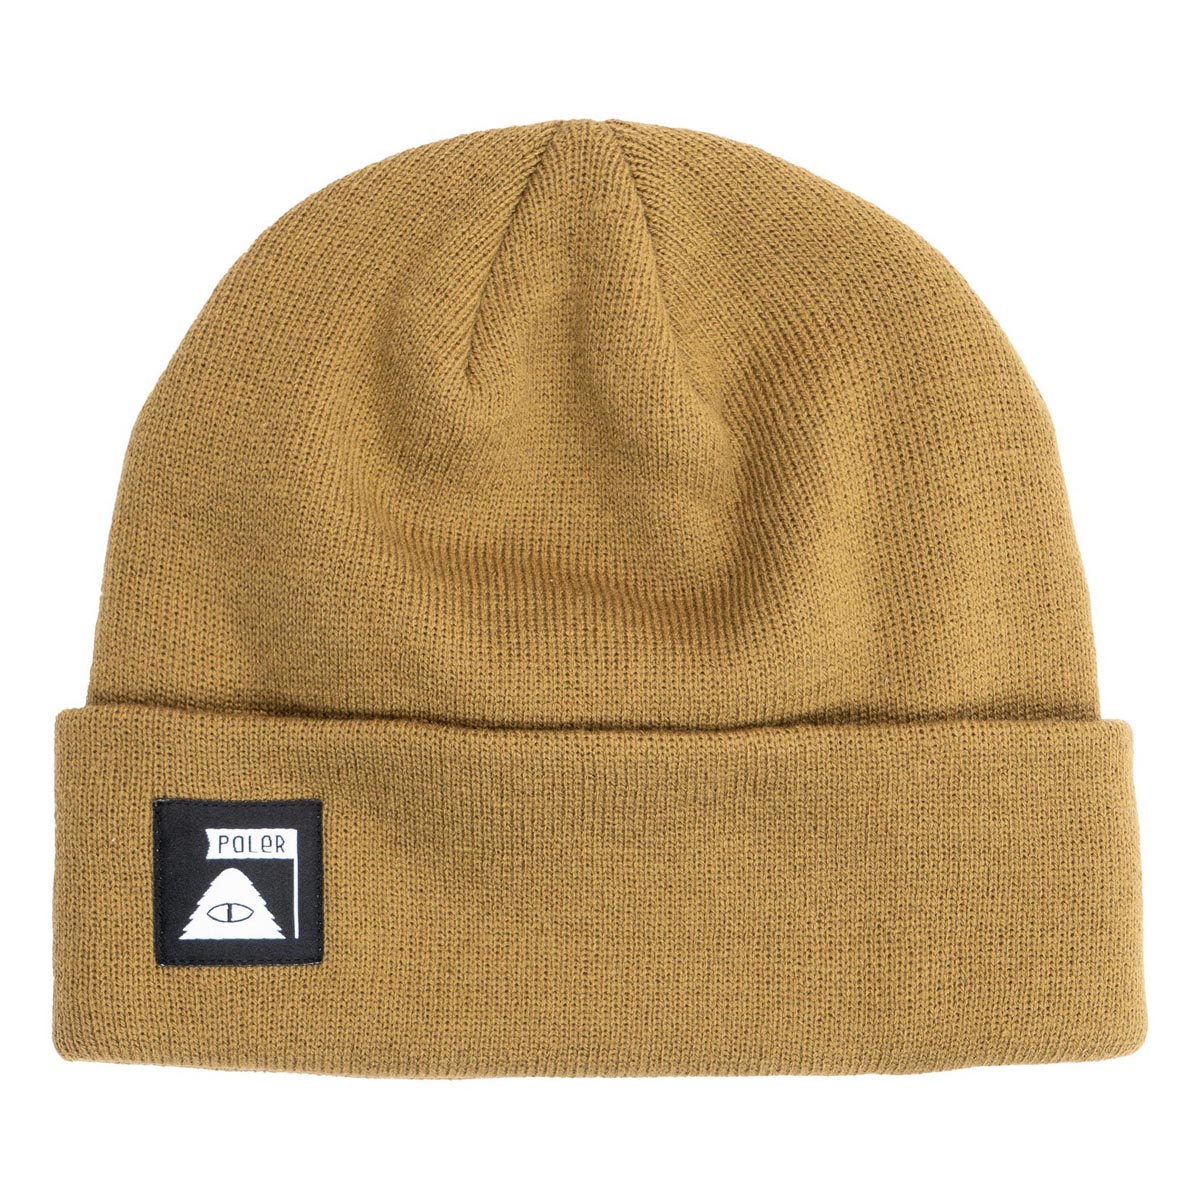 Poler Daily Driver Beanie - Olive Pit image 1